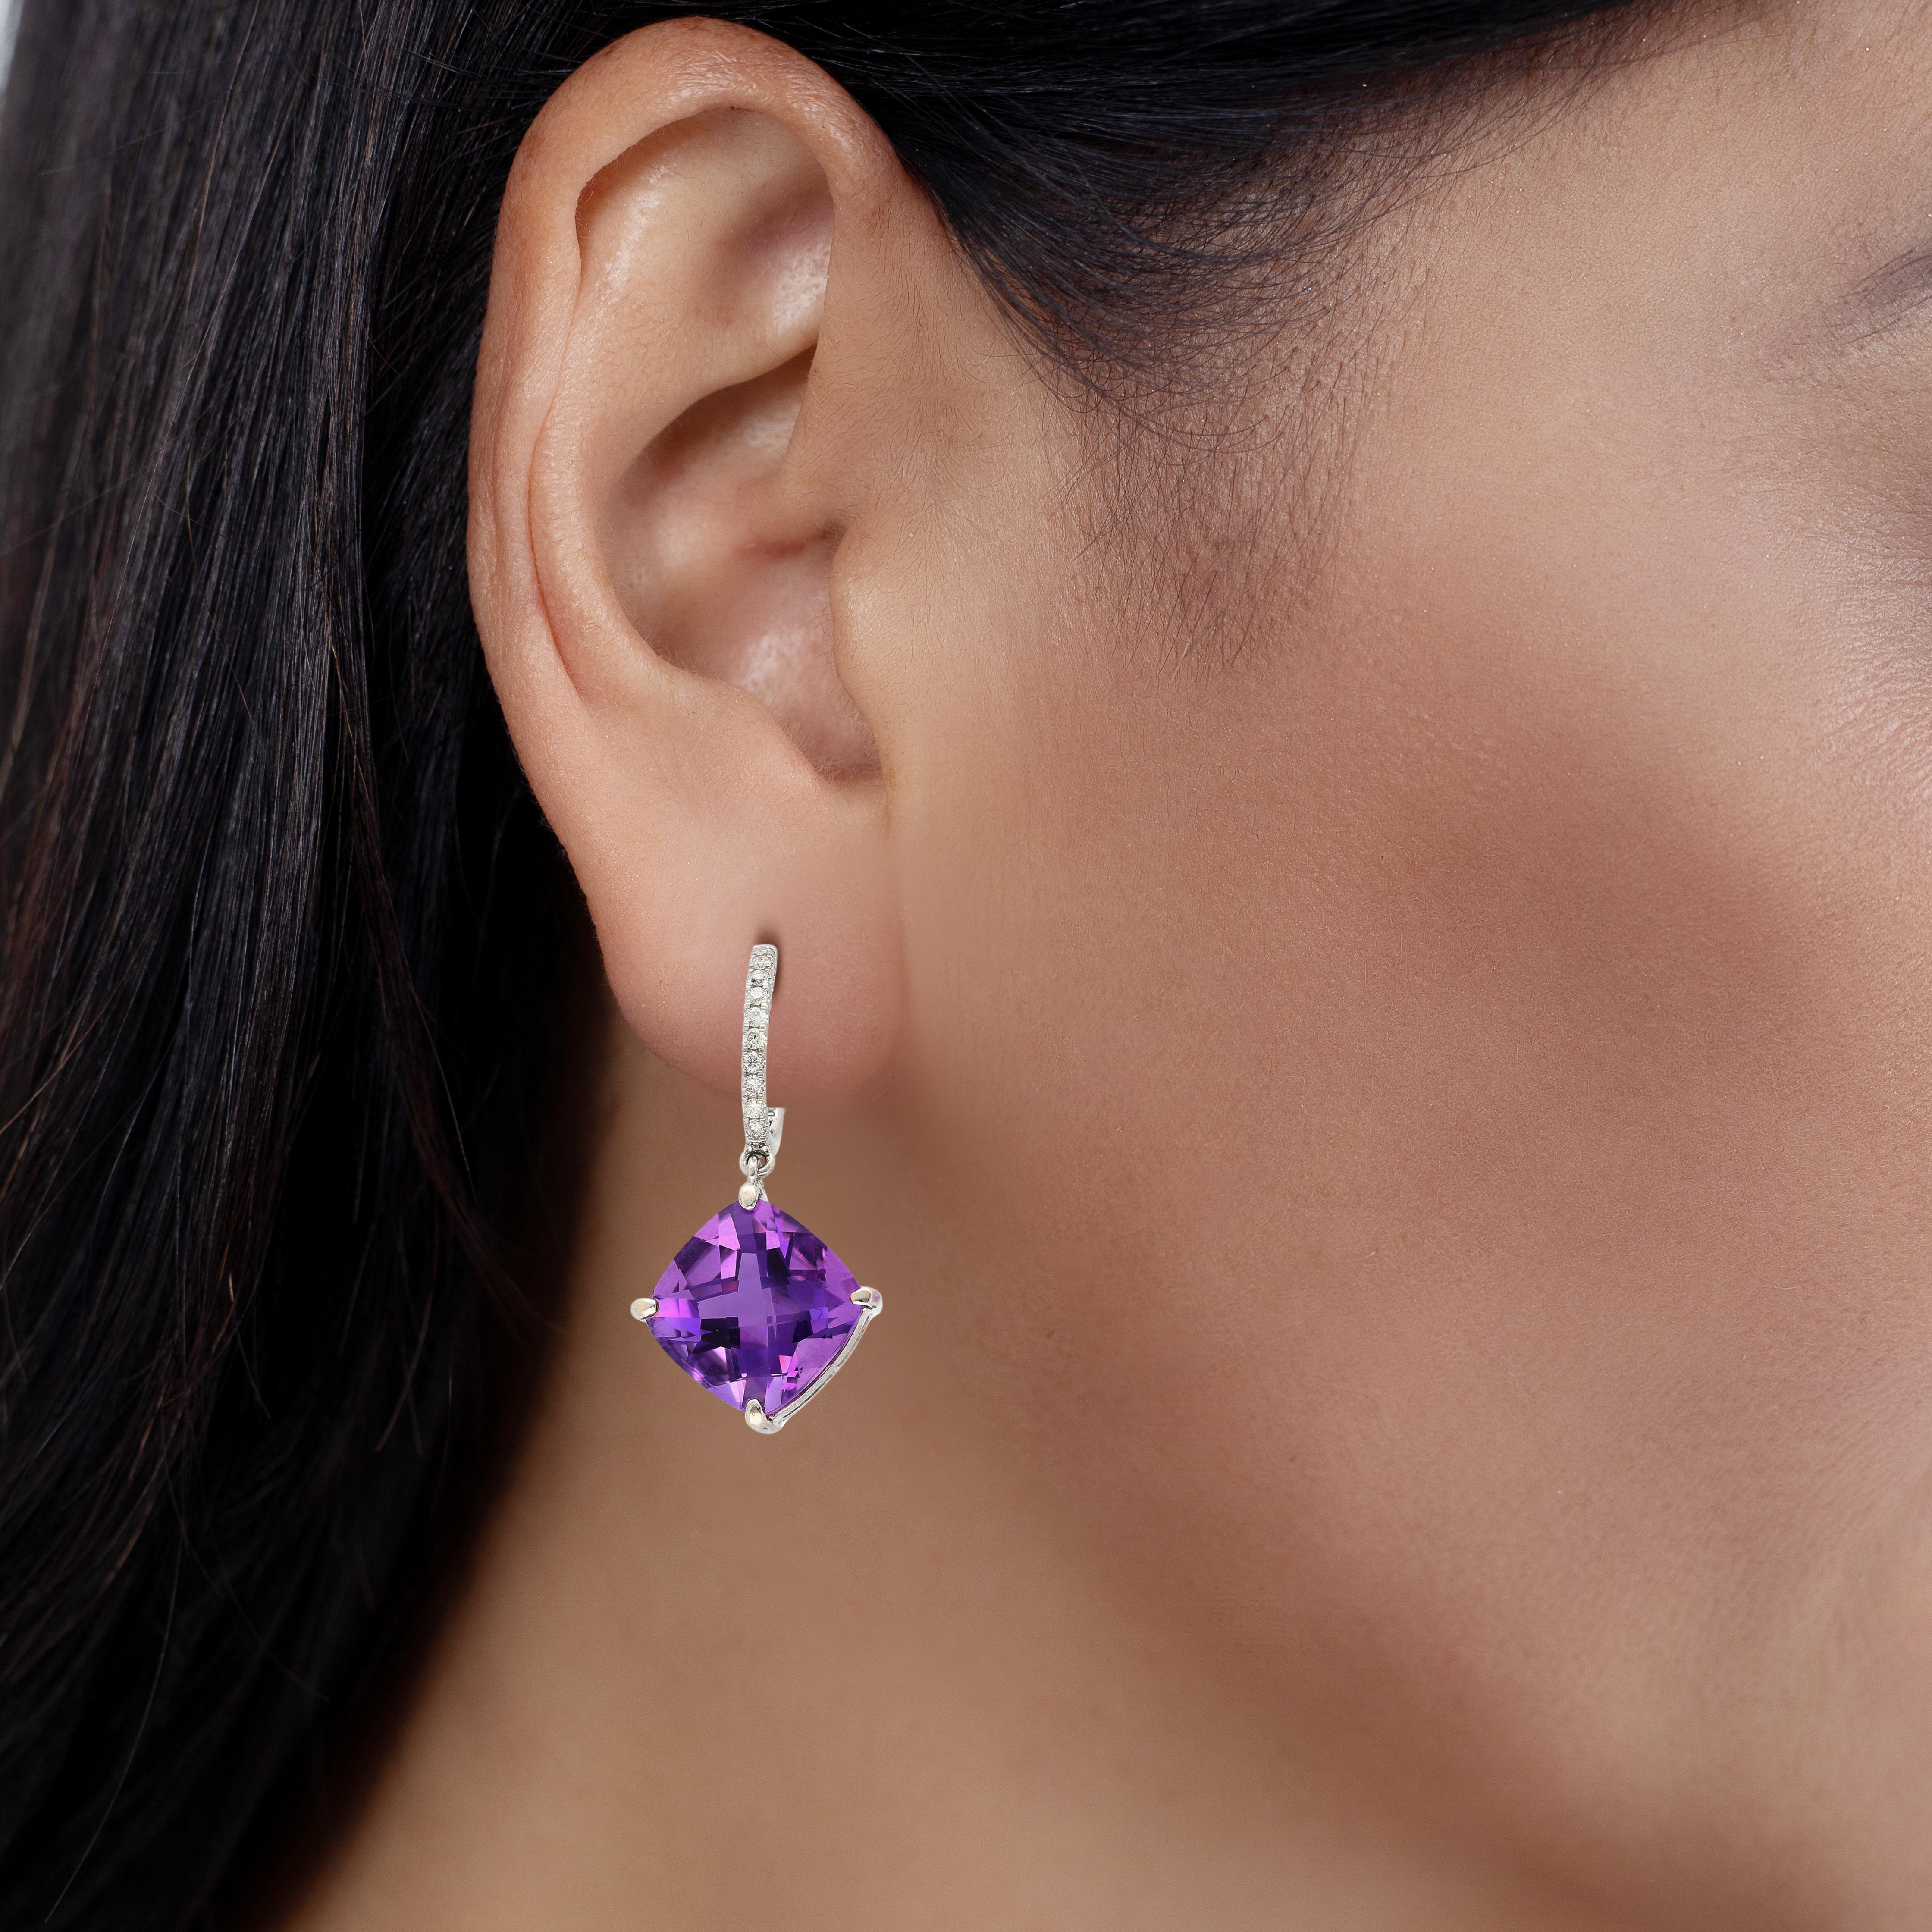 These mesmerizing earrings feature a captivating duet of cushion-cut amethysts, totaling 13.12ct together, their rich purple hues shimmering with elegance. Secured in delicate prong settings, the amethysts gracefully dangle from lustrous 18k white